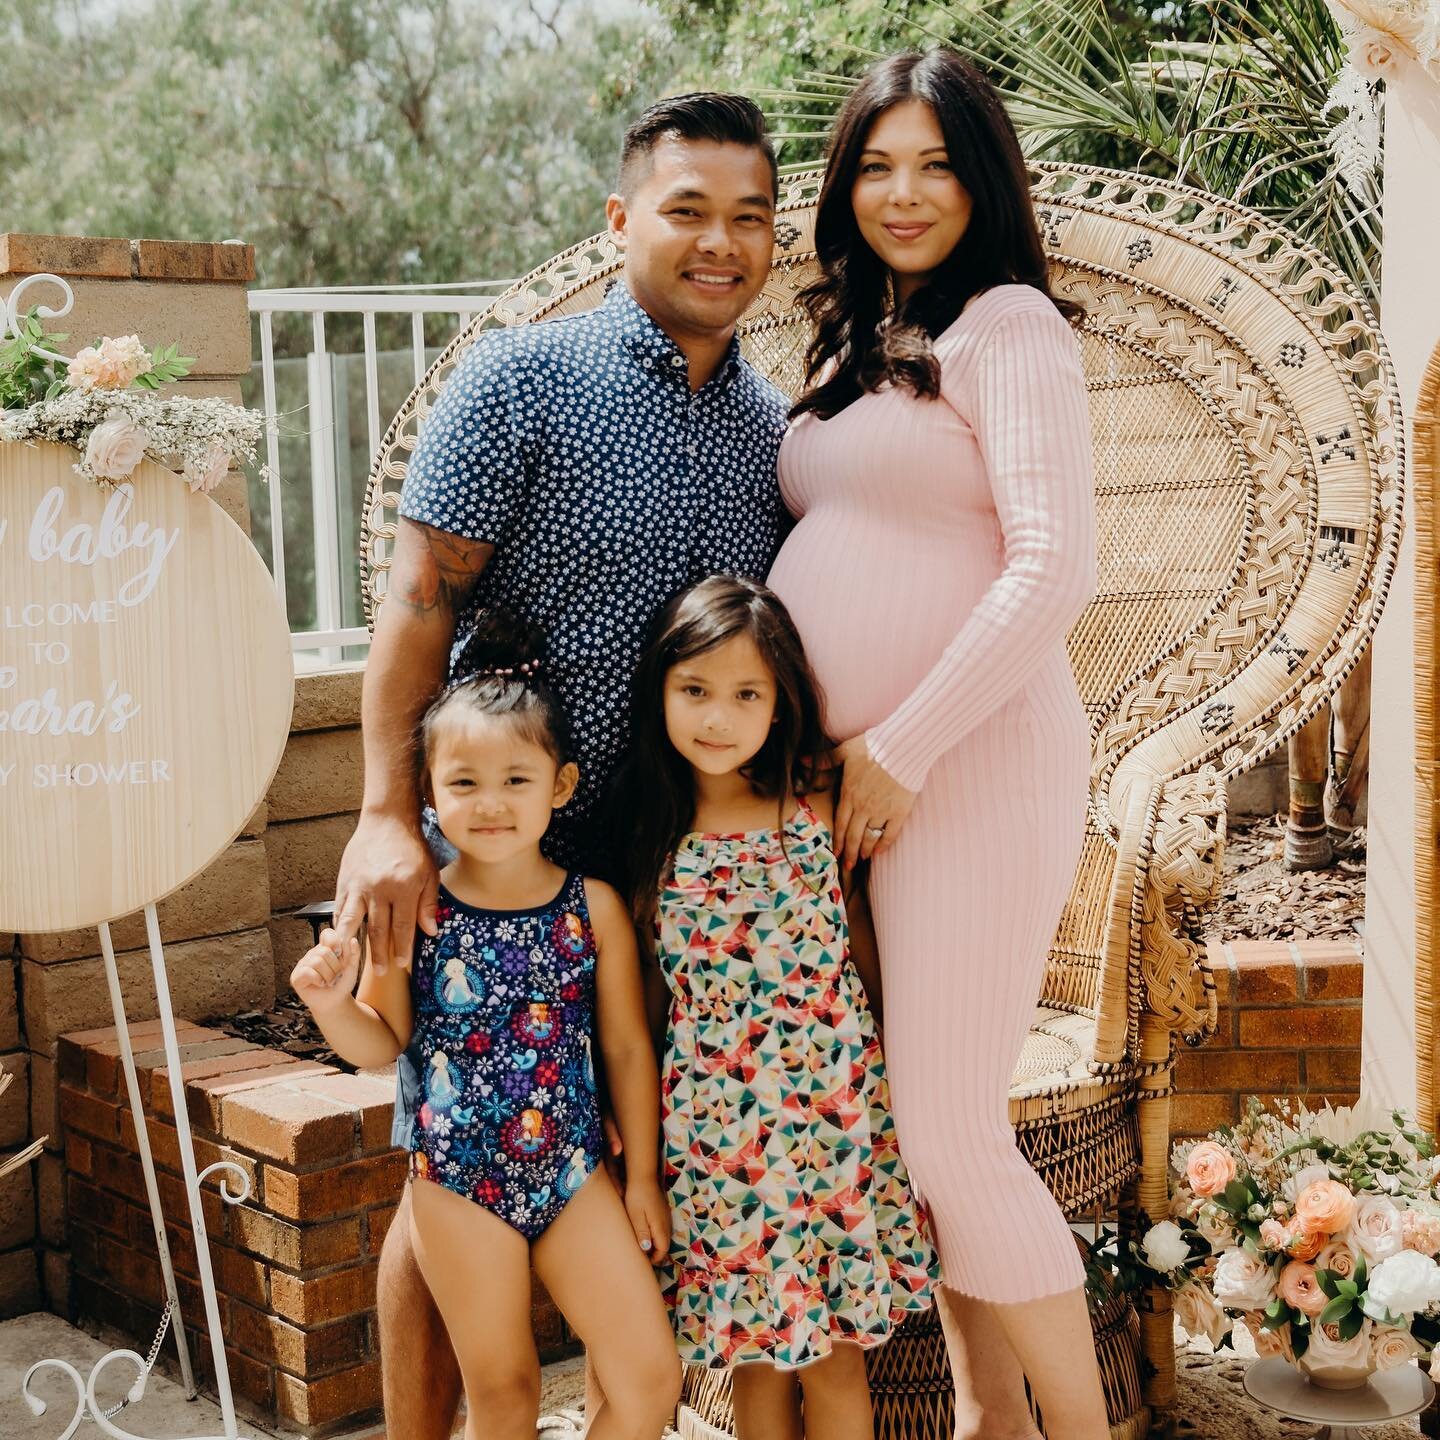 Happy Mother&rsquo;s Day to my lovely wife!Thank you for giving me two amazing daughters ( soon to be three). We love you to the moon and back. ❤️❤️❤️